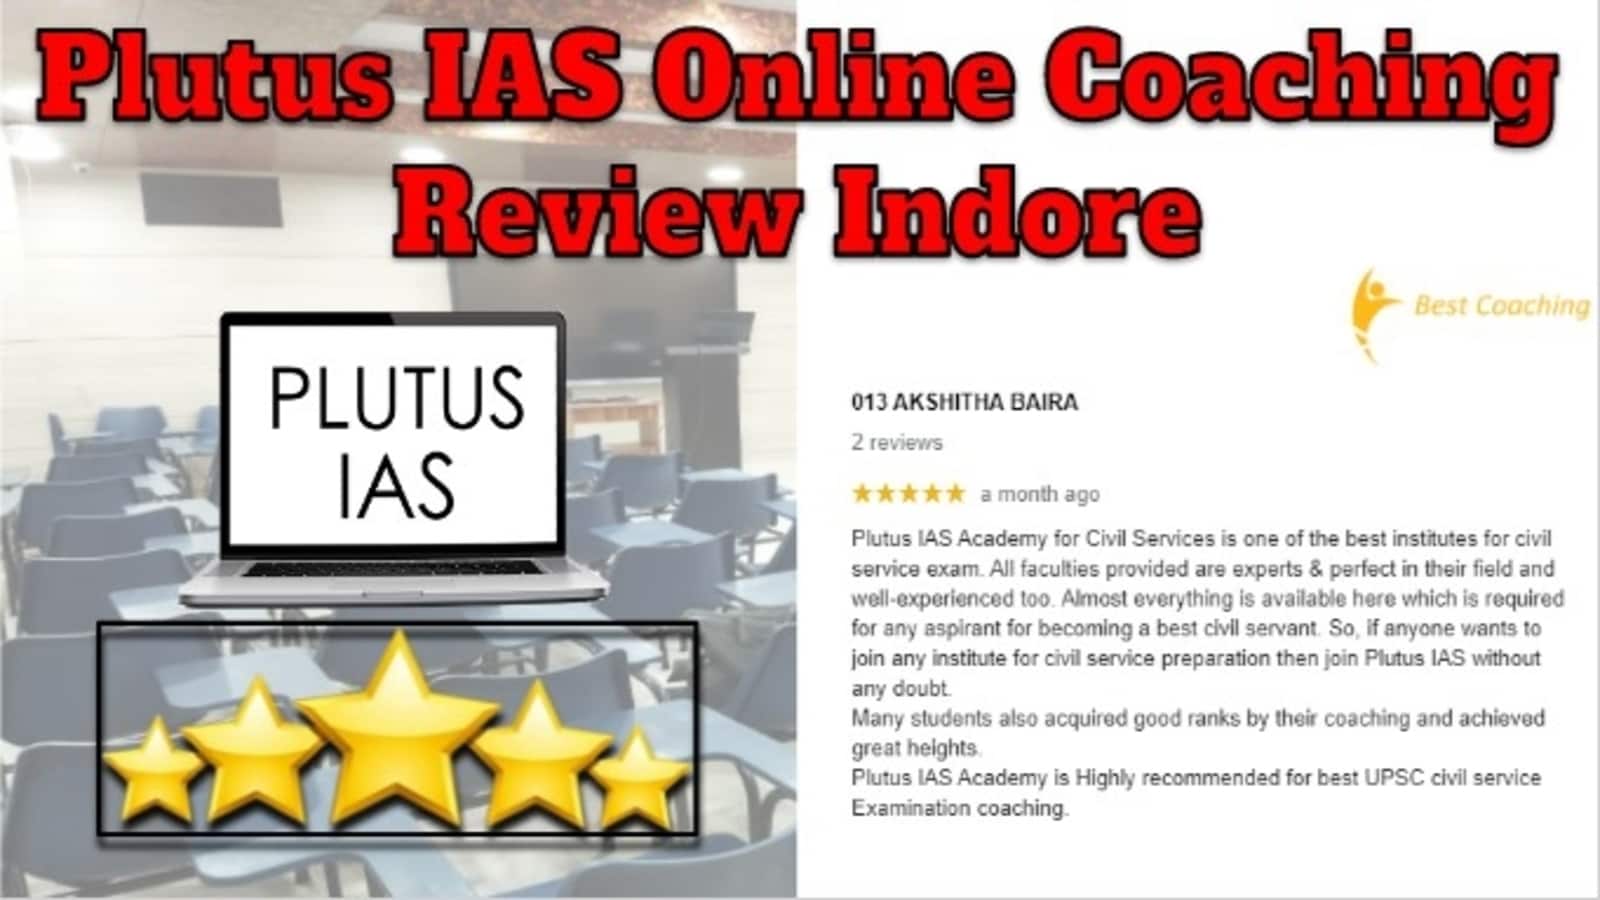 Plutus IAS Online Coaching Review Indore